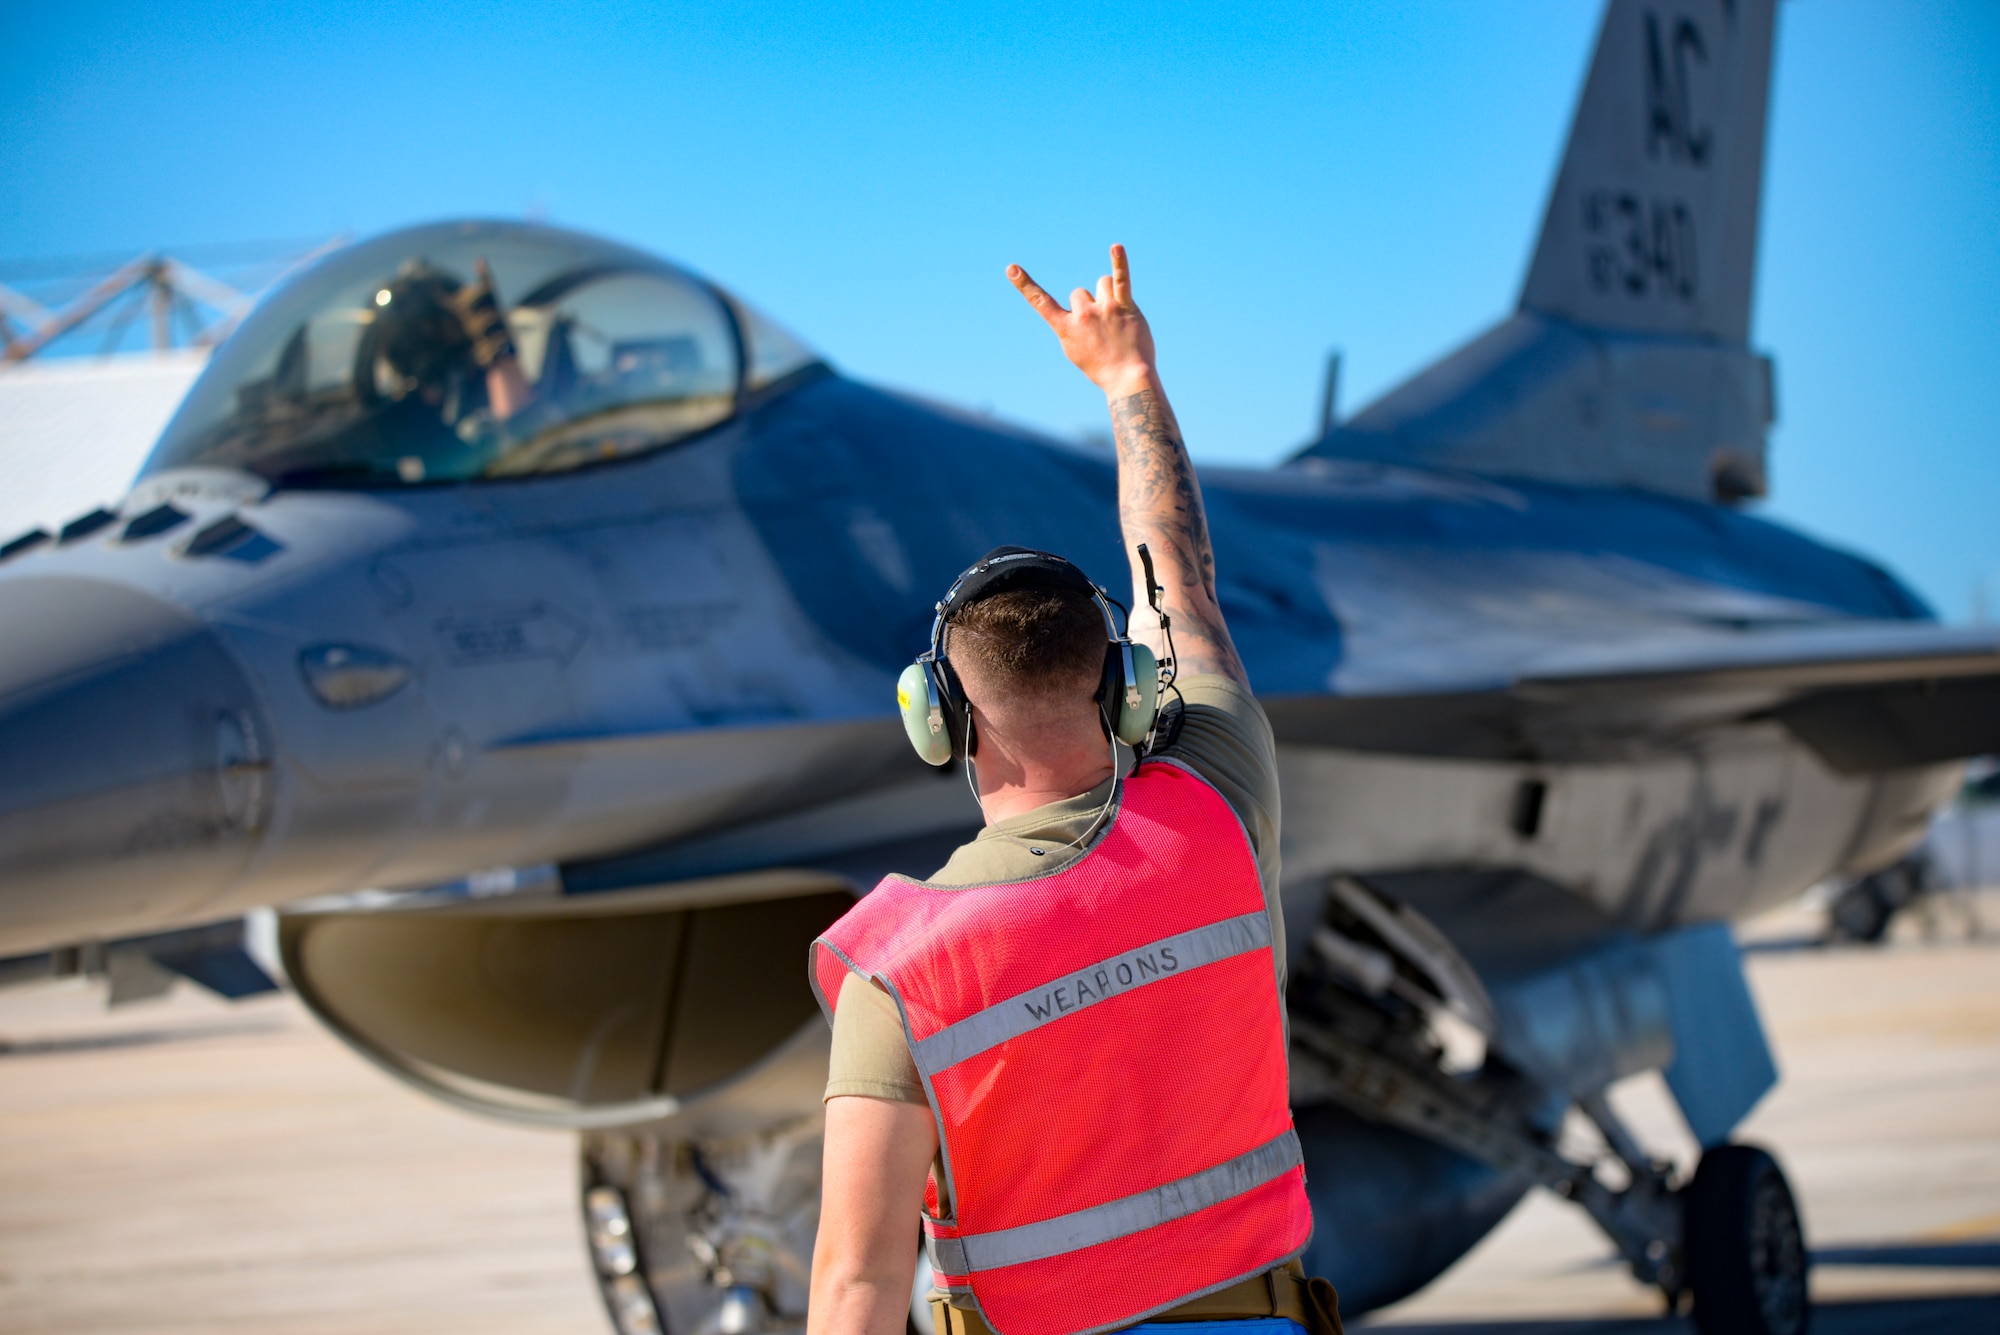 An image of load crew chief marshaling an F-16 Fighting Falcon